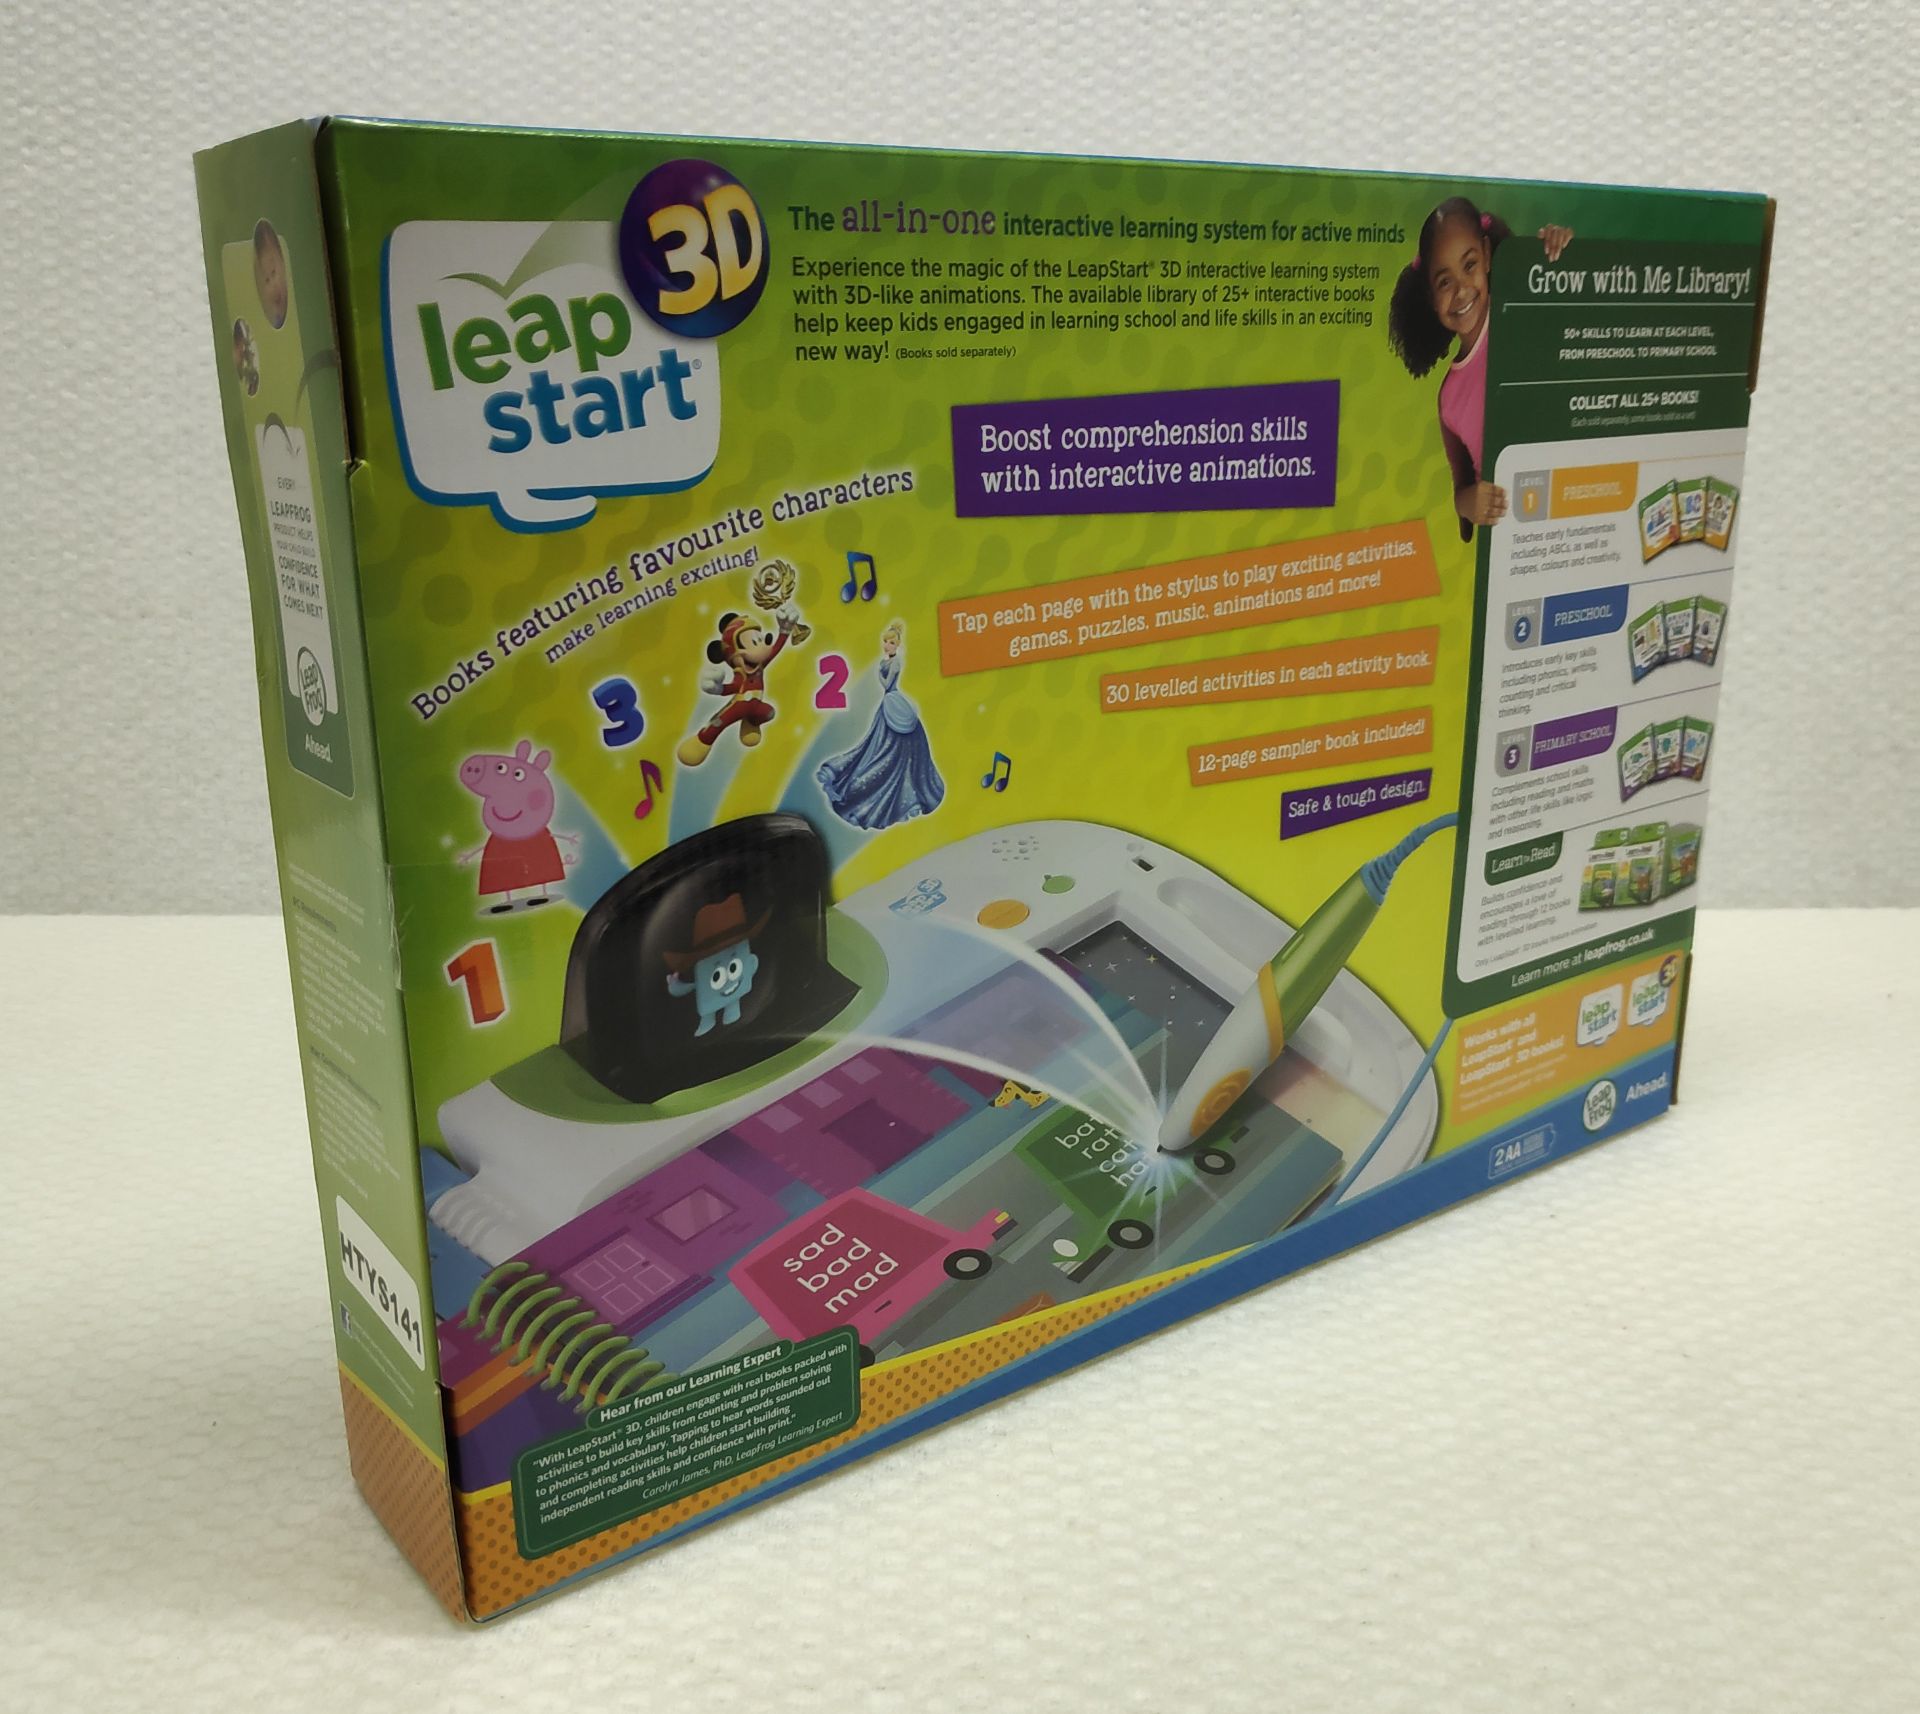 1 x LeapFrog LeapStart 3D Interactive Learing System - New/Boxed - Image 4 of 6